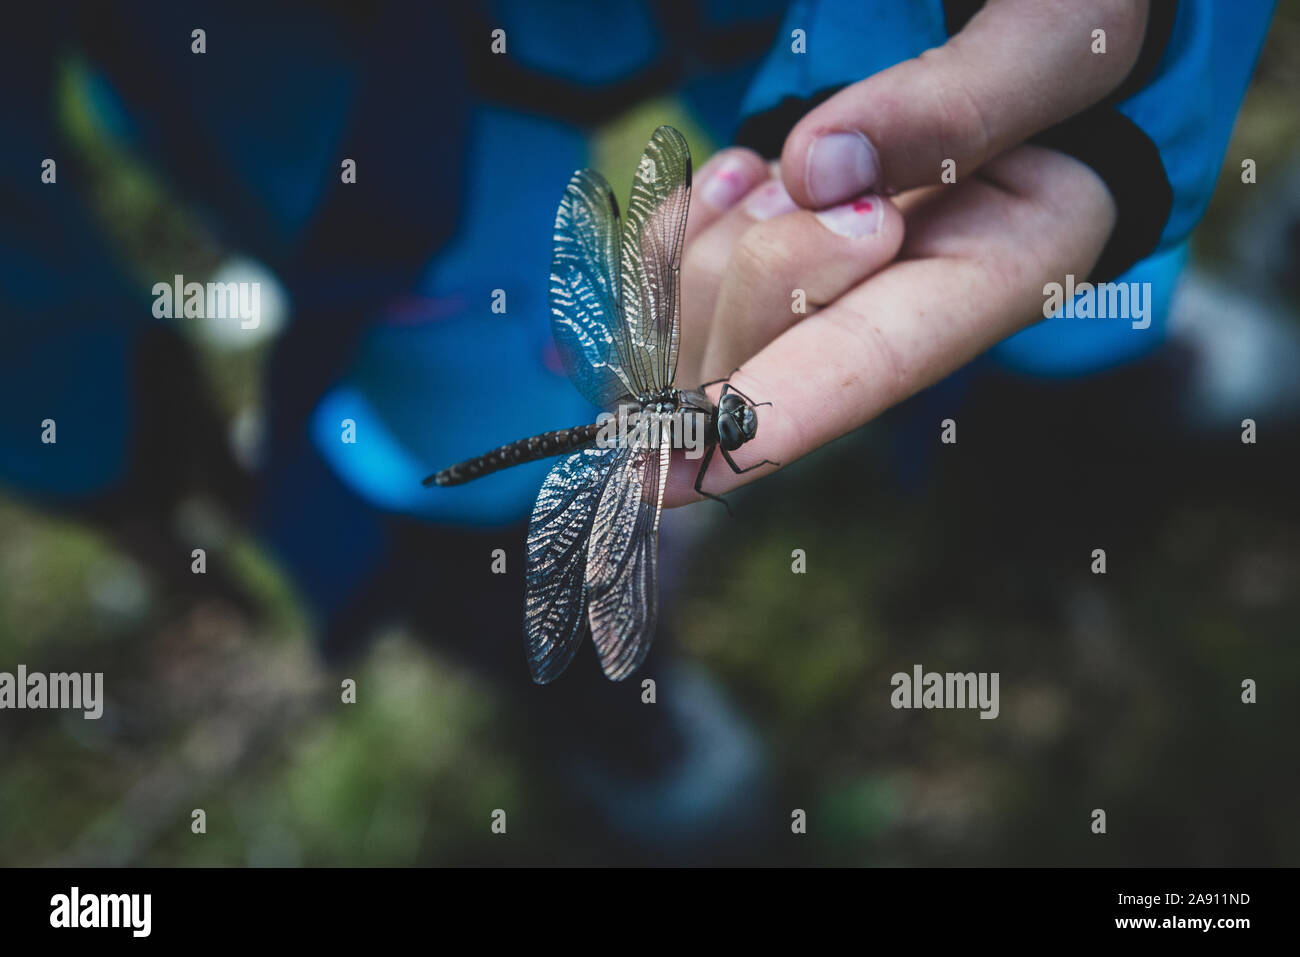 Dragonfly on hand Stock Photo